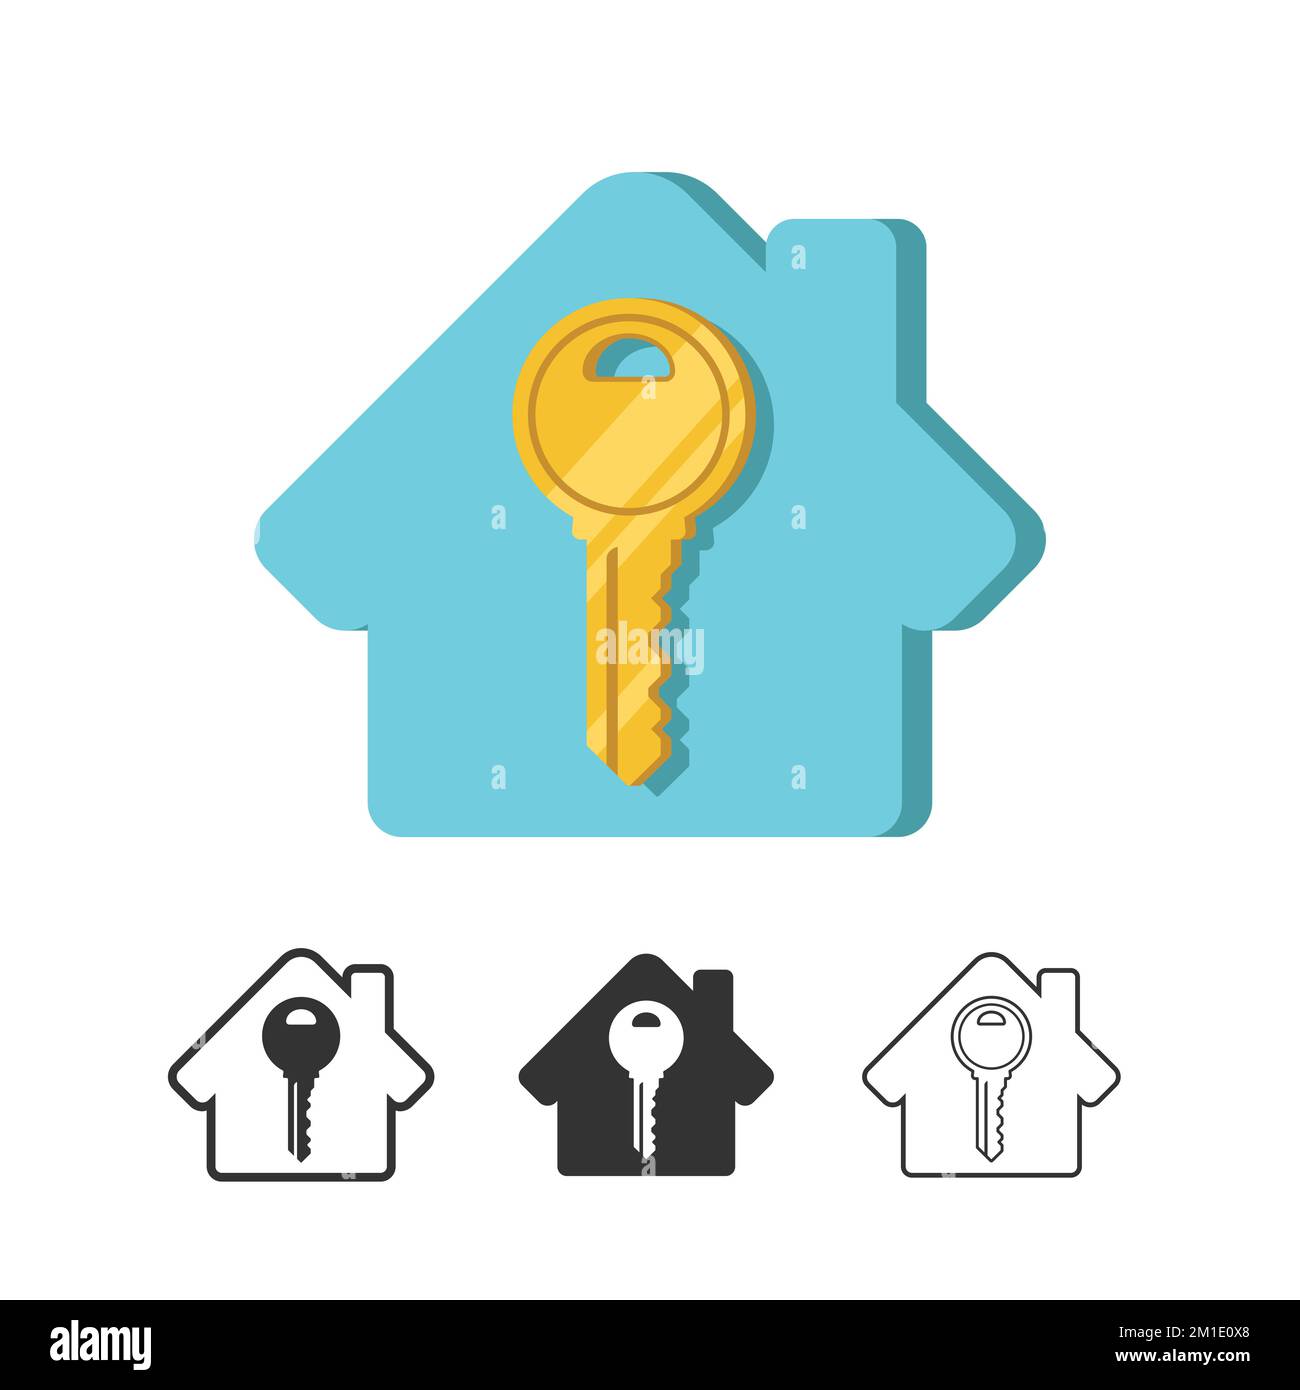 Vector house key icon set. Security concept illustration. Stock Vector